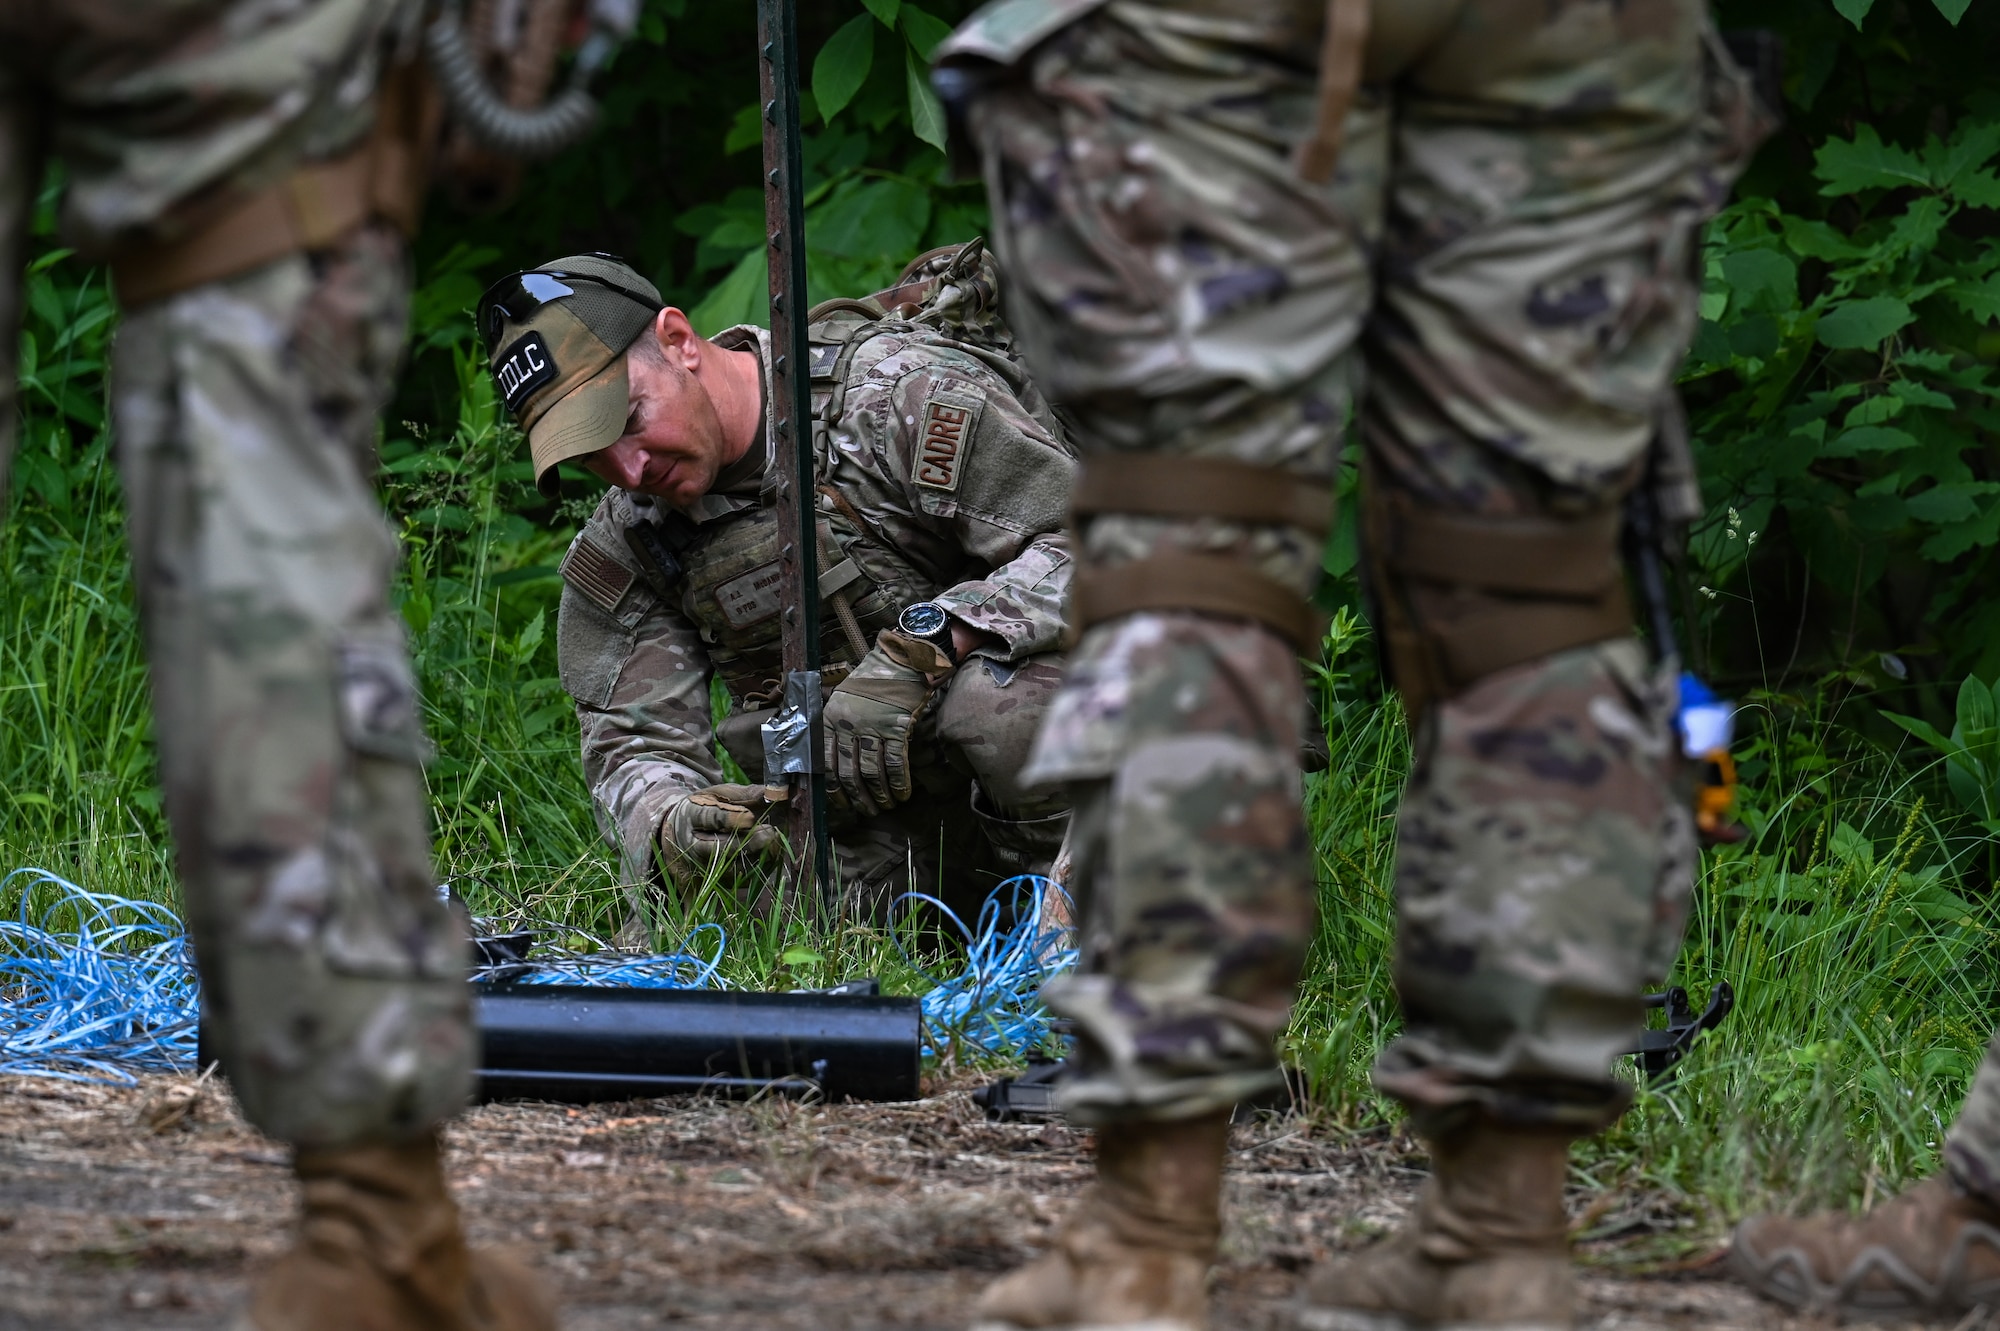 Tech. Sgt. Anthony McDaniel, an Integrated Defense Leadership Course cadre member assigned to the 914th Security Forces Squadron, Niagara Falls Air Reserve Station, New York, demonstrates how to set up an early warning device on June 15, 2023, at Camp James A. Garfield Joint Military Training Center, Ohio.